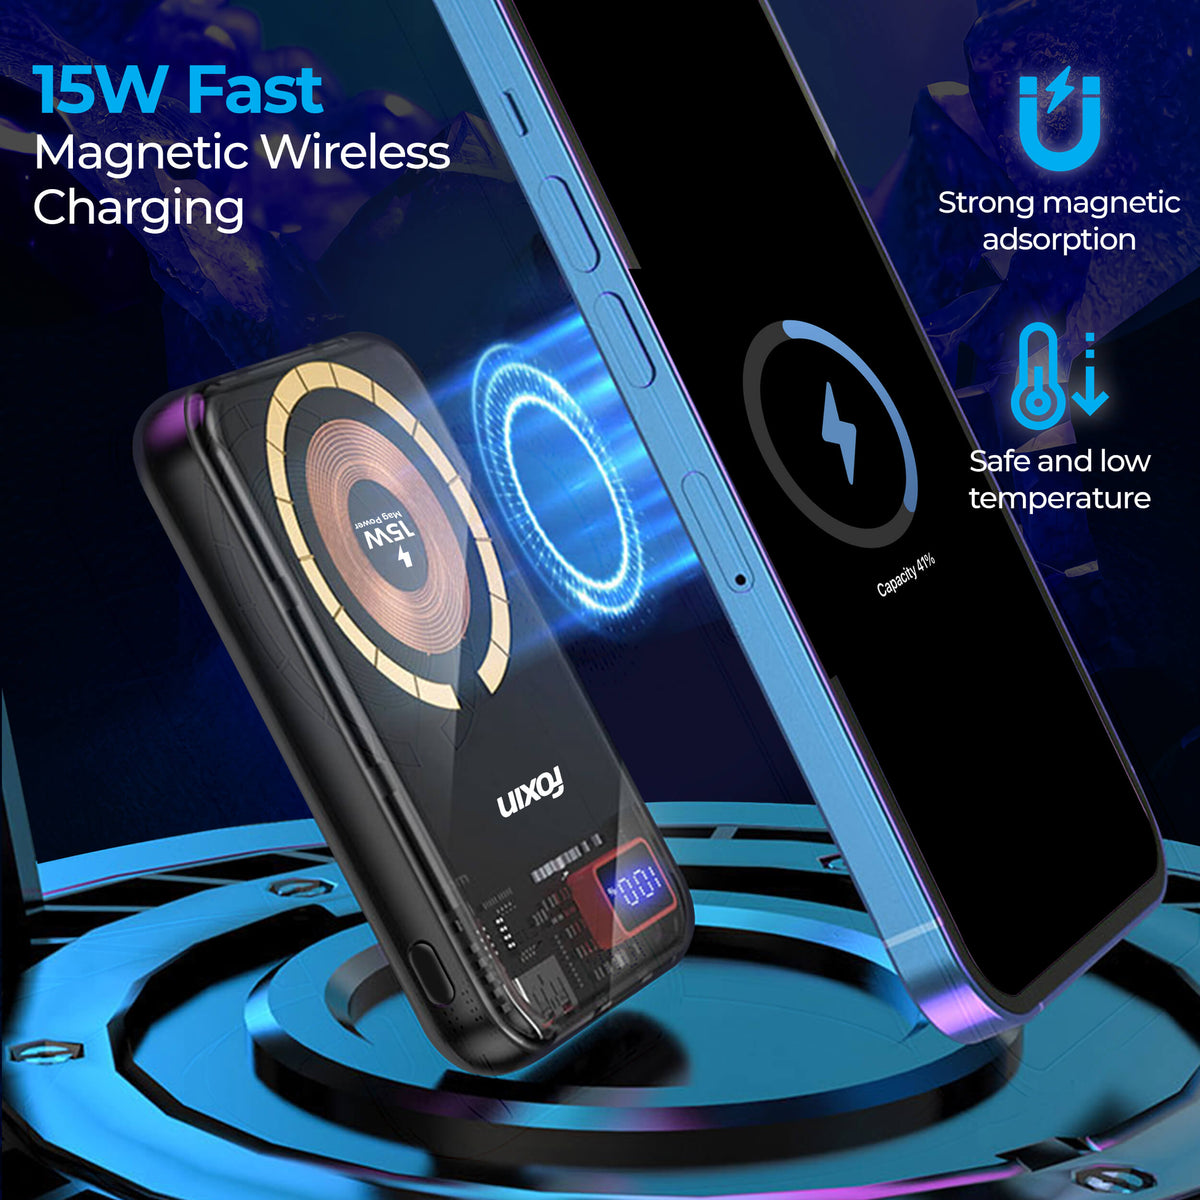 Foxin Mag 15 Pro Wireless Power Bank 10,000 mAh | 22.5W QC+PD Fast Charging | BIS Certified